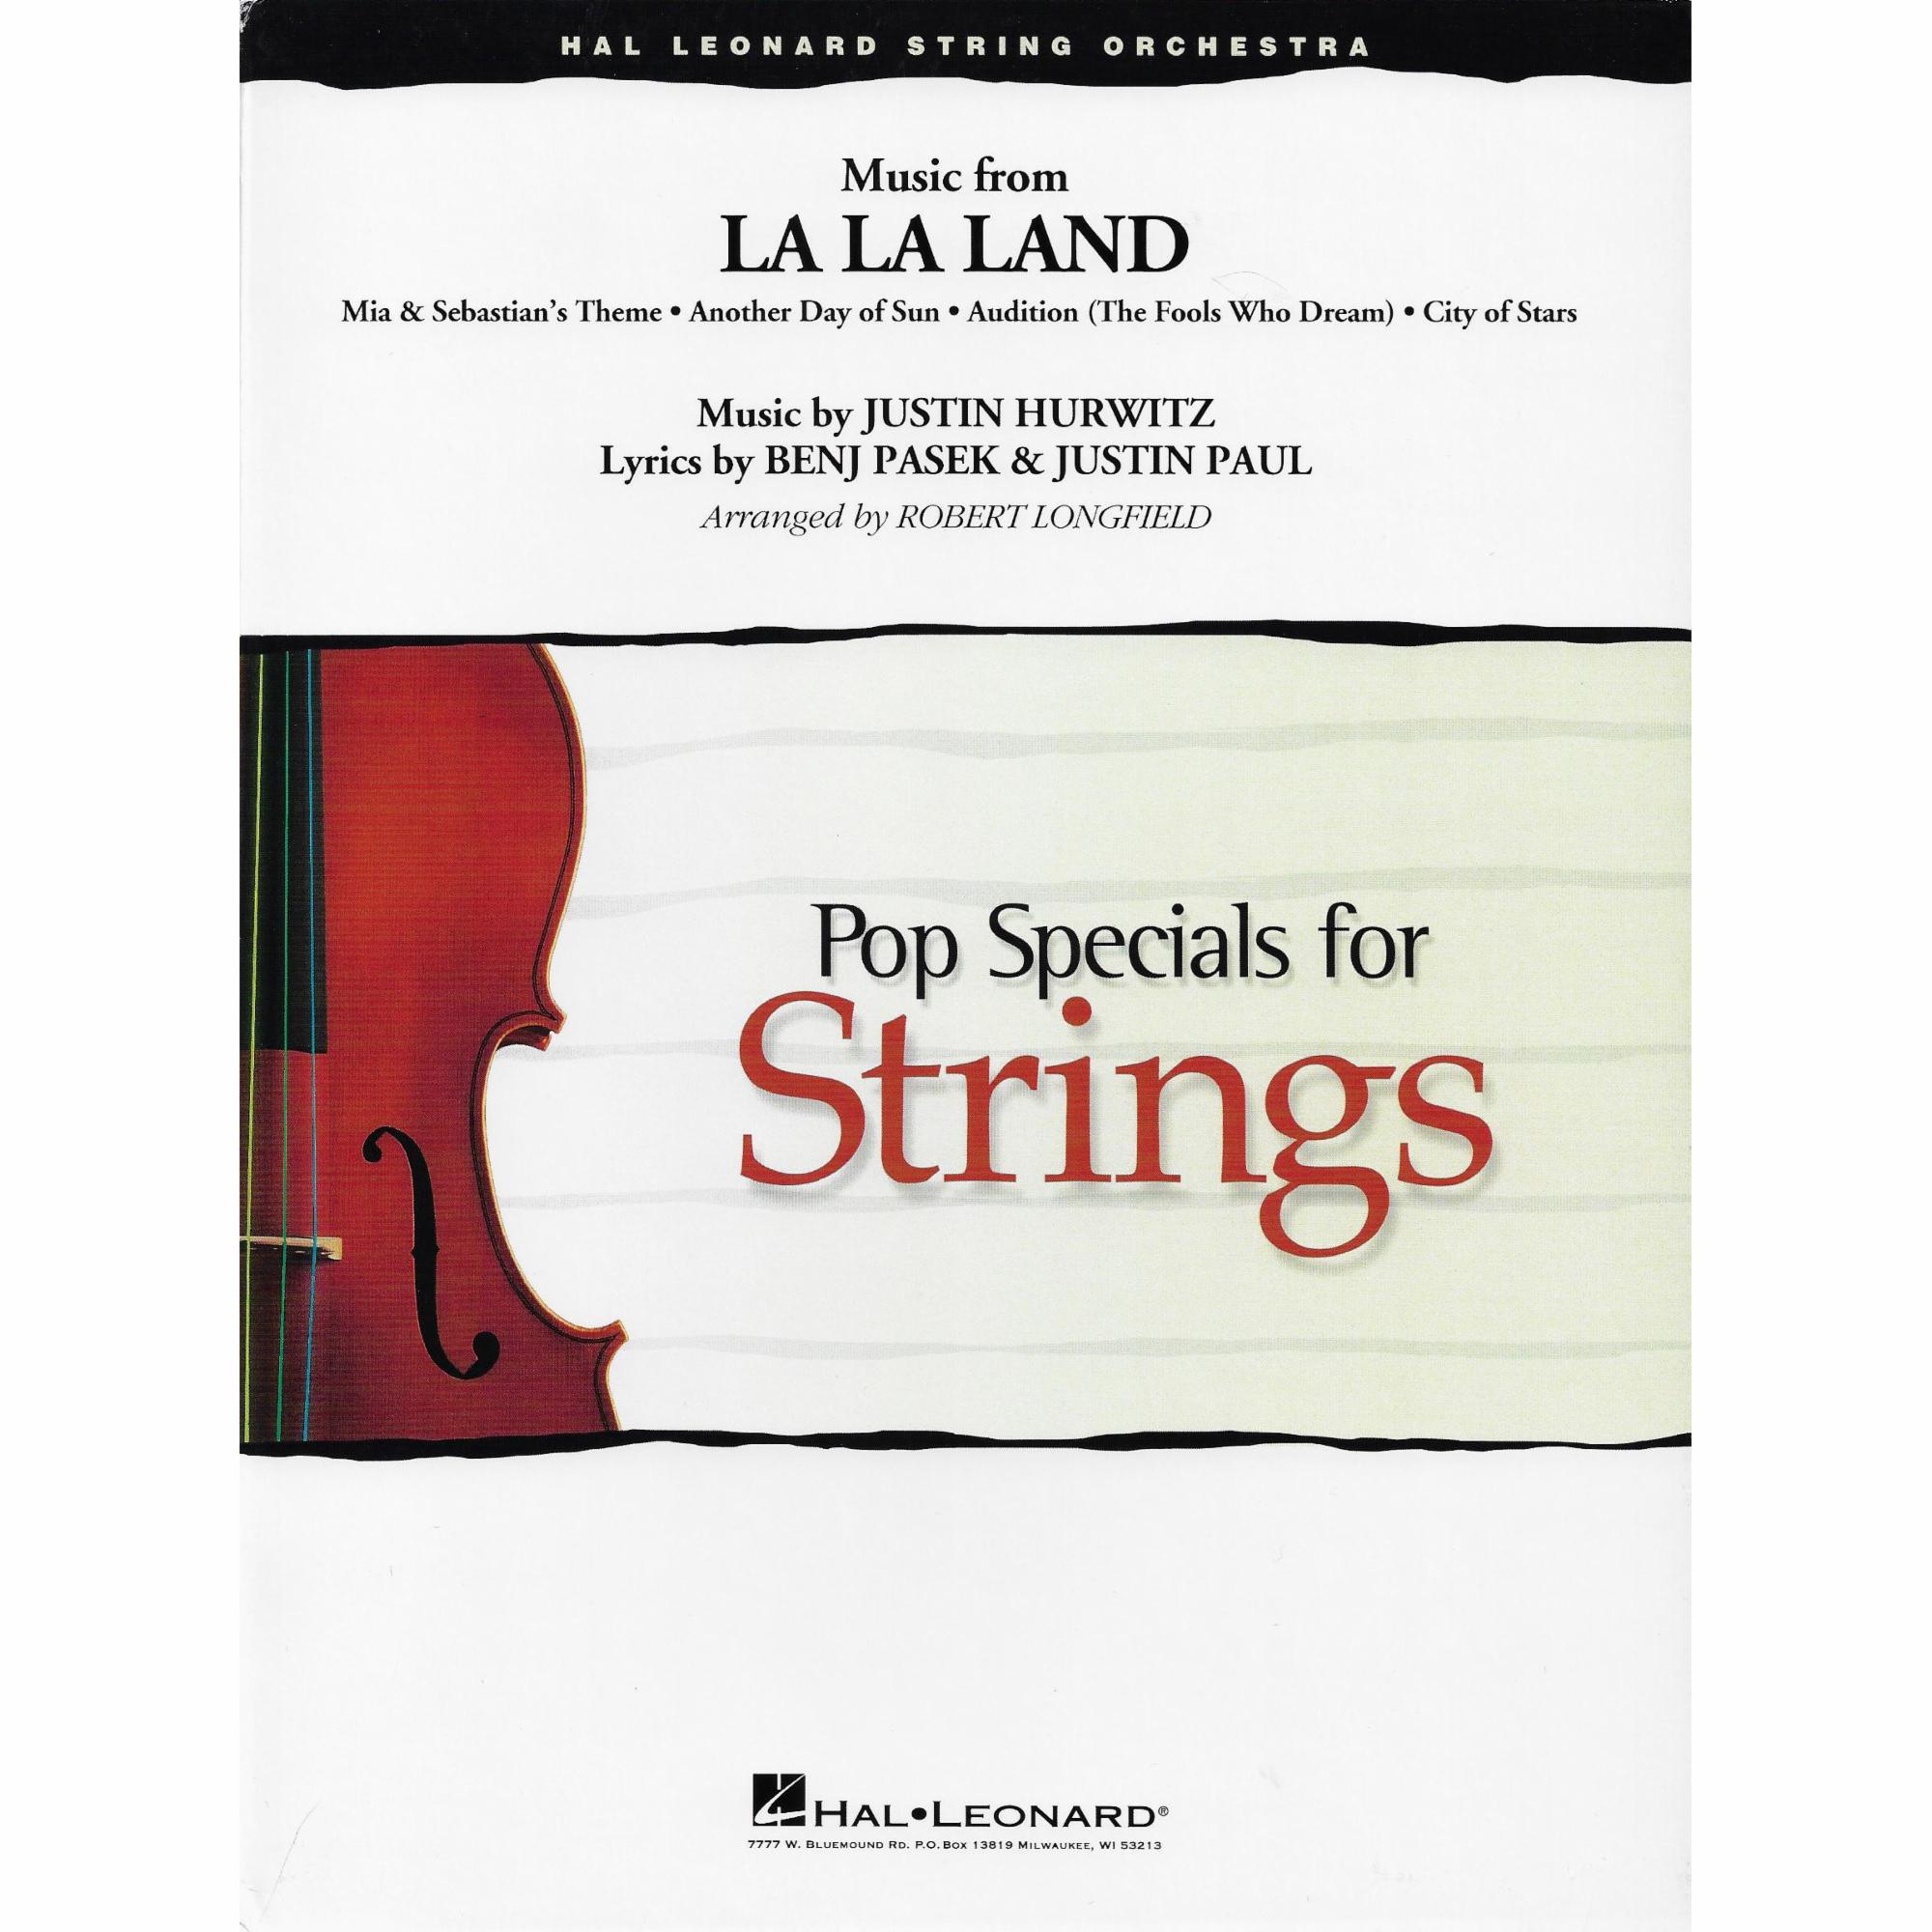 Music from La La Land for String Orchestra